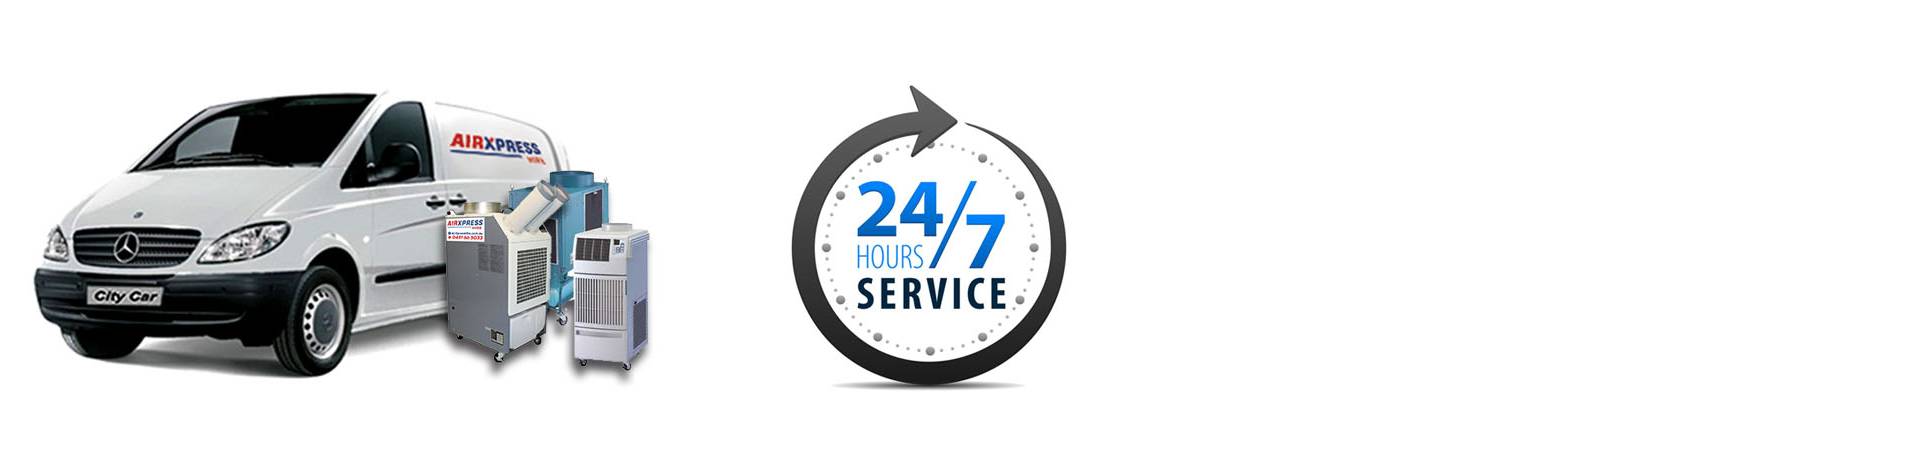 URGENTLY NEED PORTABLE AIR CONDITIONER HIRE? WE OFFER 24/7 DELIVERY!